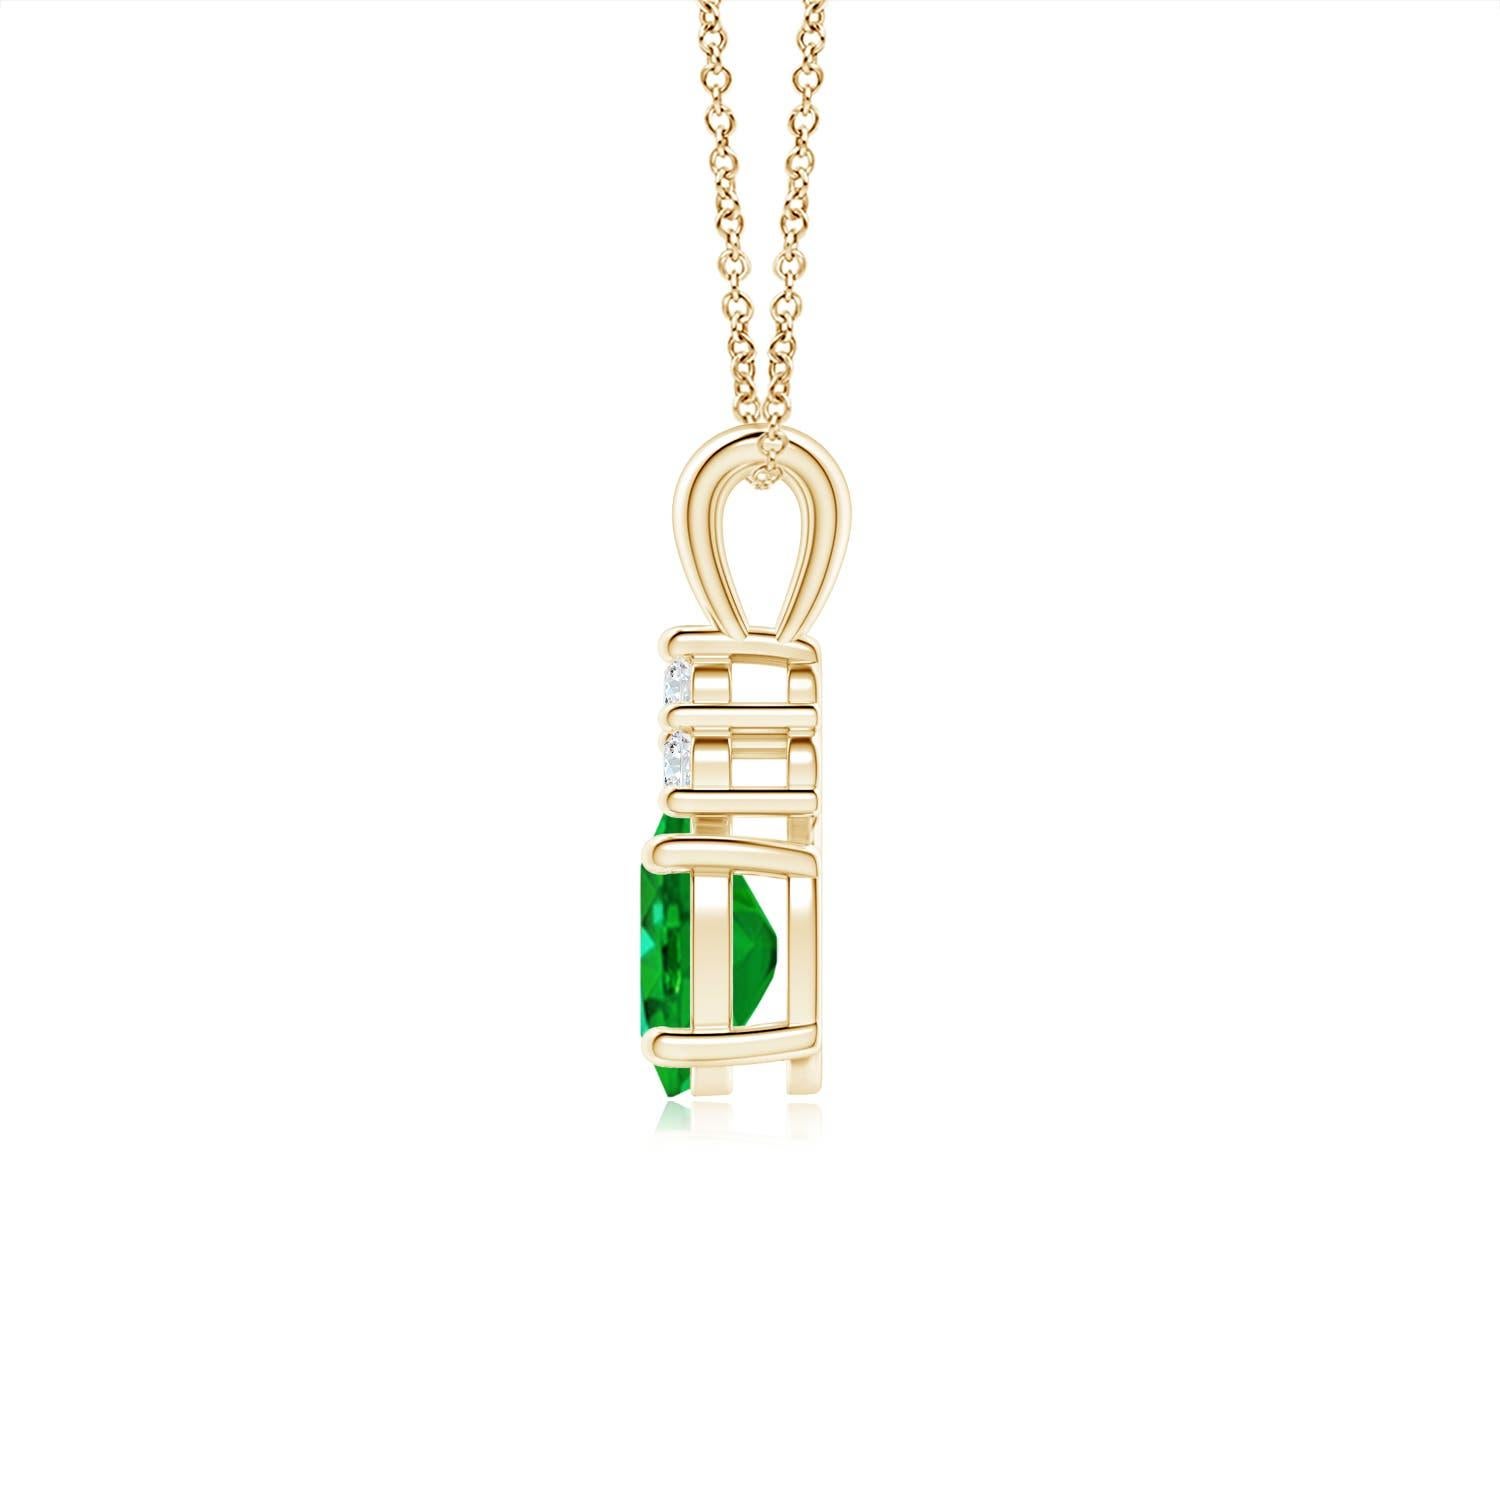 Set in 14k yellow gold, this classic solitaire emerald pendant showcases the perfect blend of style and elegance. It features a lush green emerald adorned with three sparkling round diamonds on the top. Linked to a lustrous v-bale, this four-prong